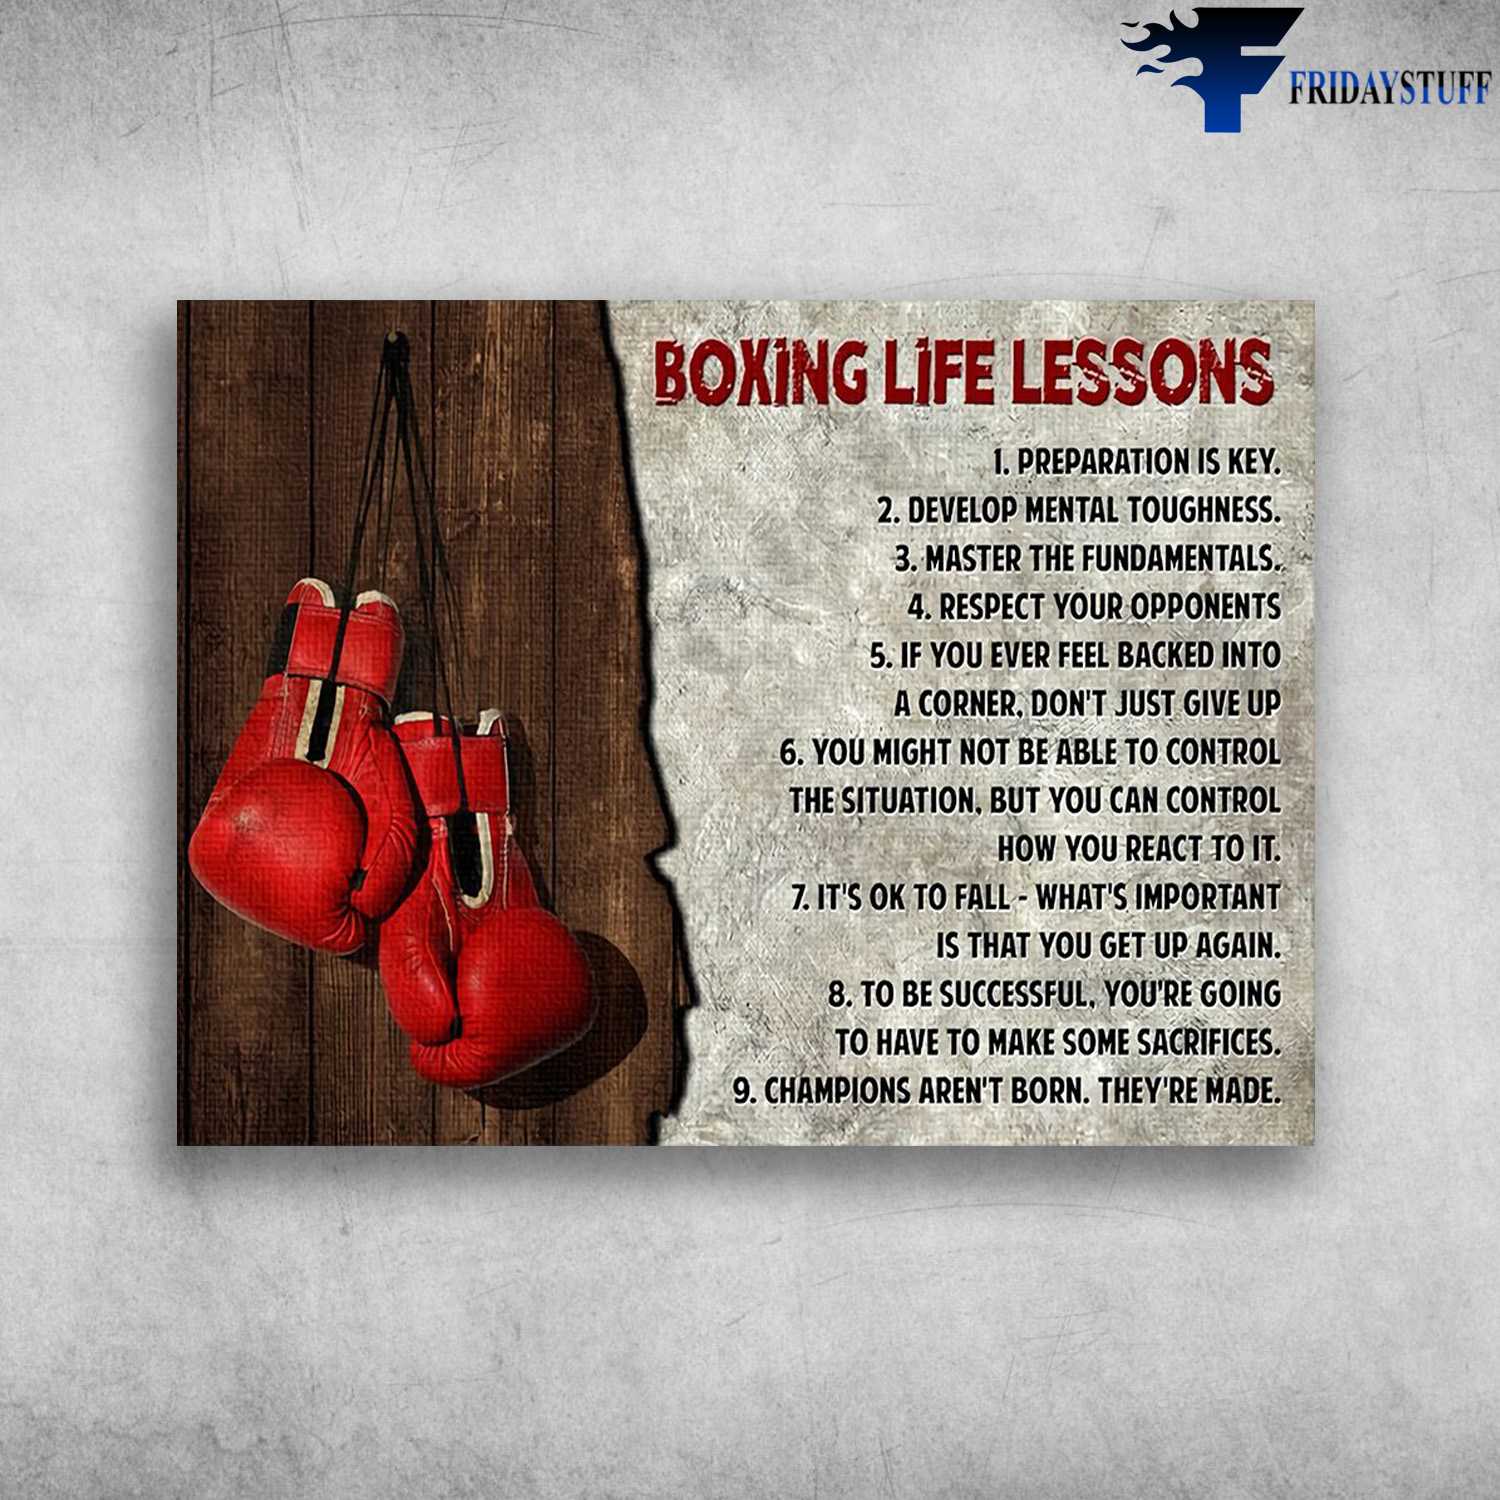 Boxing Gloves - Boxing Life Lessons, Preparation Is Key, Develop Mental Toughness, Master The Fundamentals, Respect Your Opponents, If You Ever Feel Backed Into